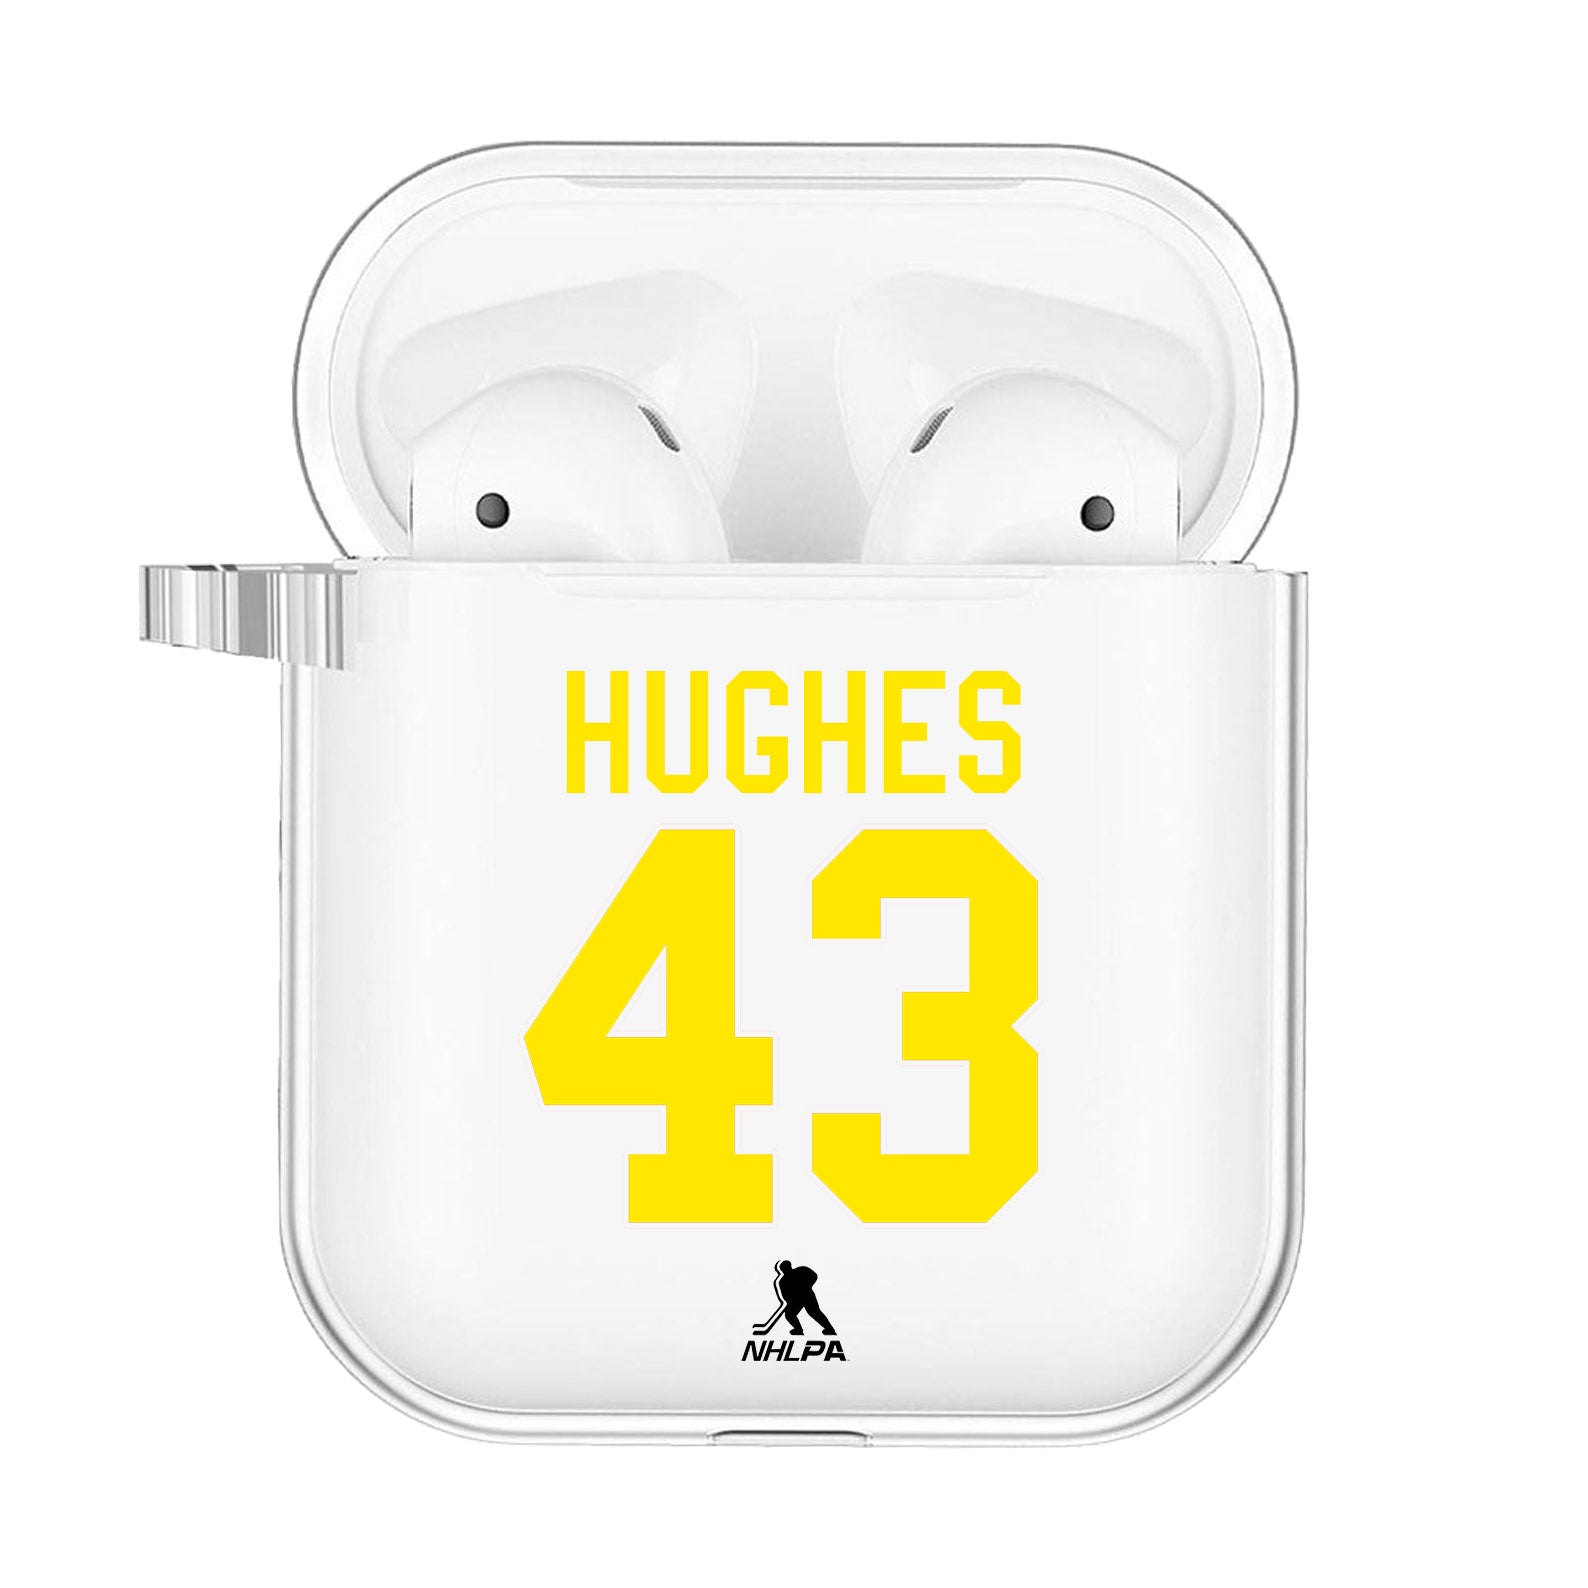 Vancouver AirPod Cases